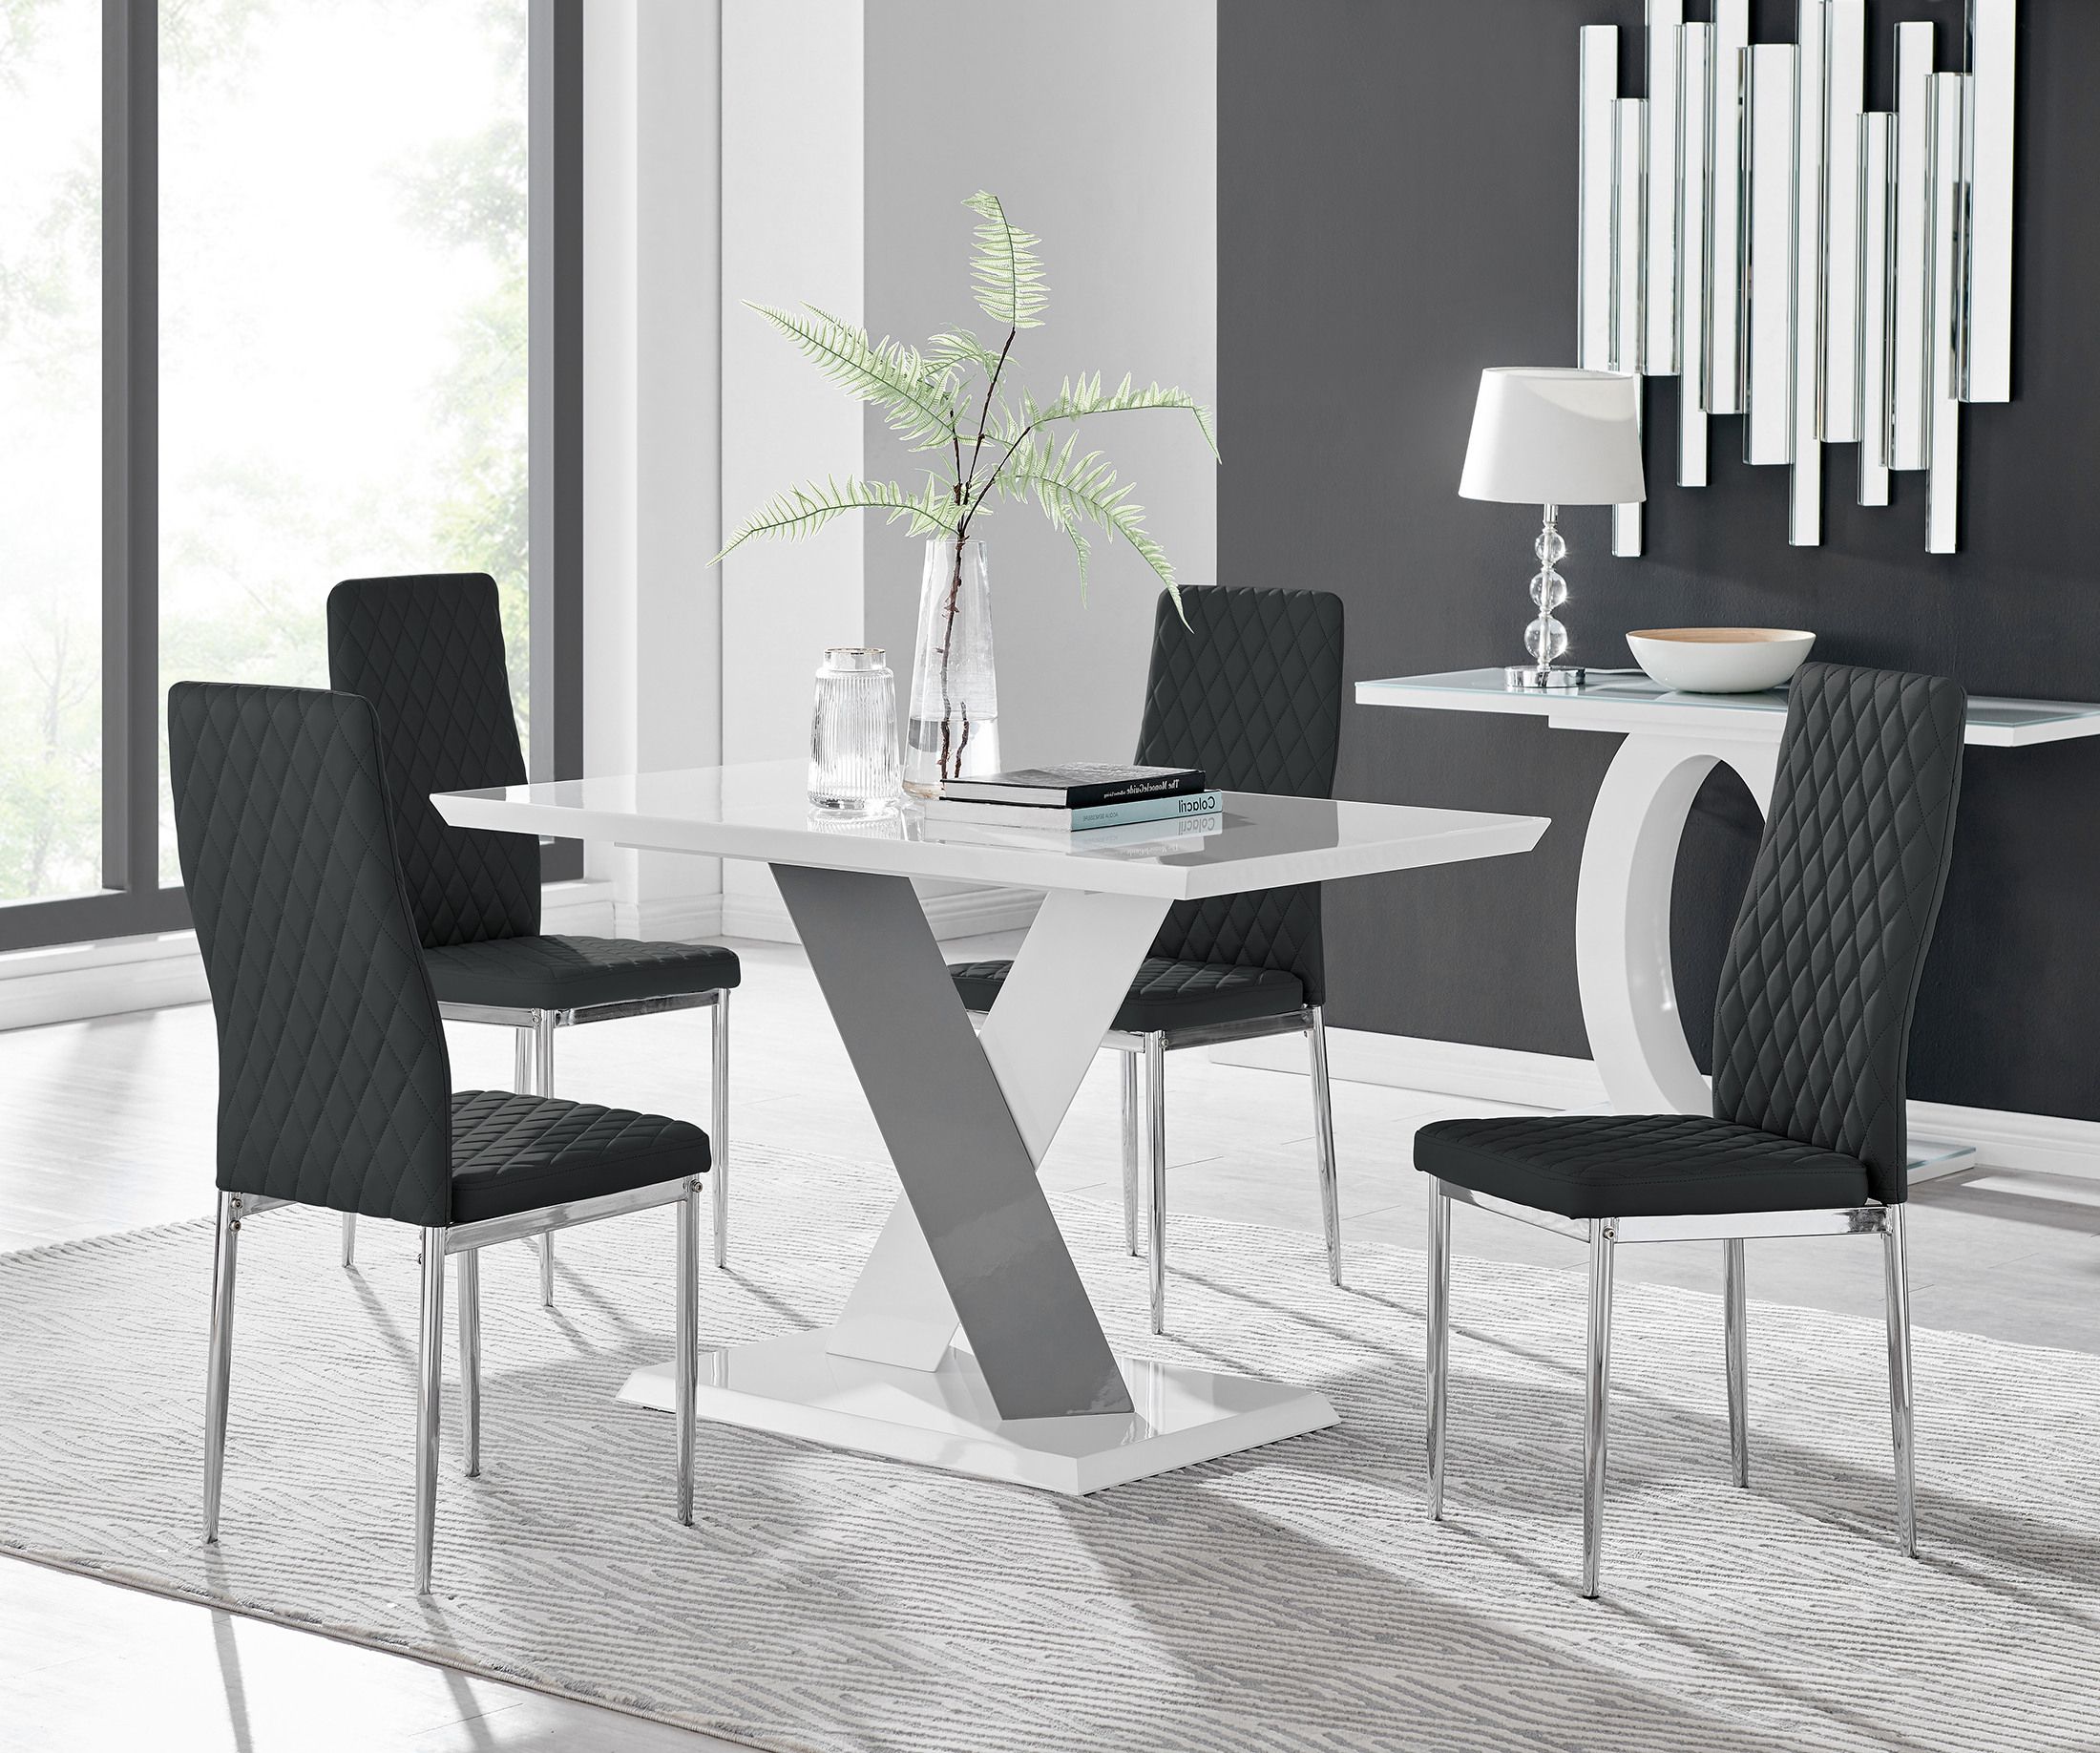 Monza 4 White/grey Dining Table & 4 Milan Chairs Throughout Monza Tv Stands (View 9 of 15)